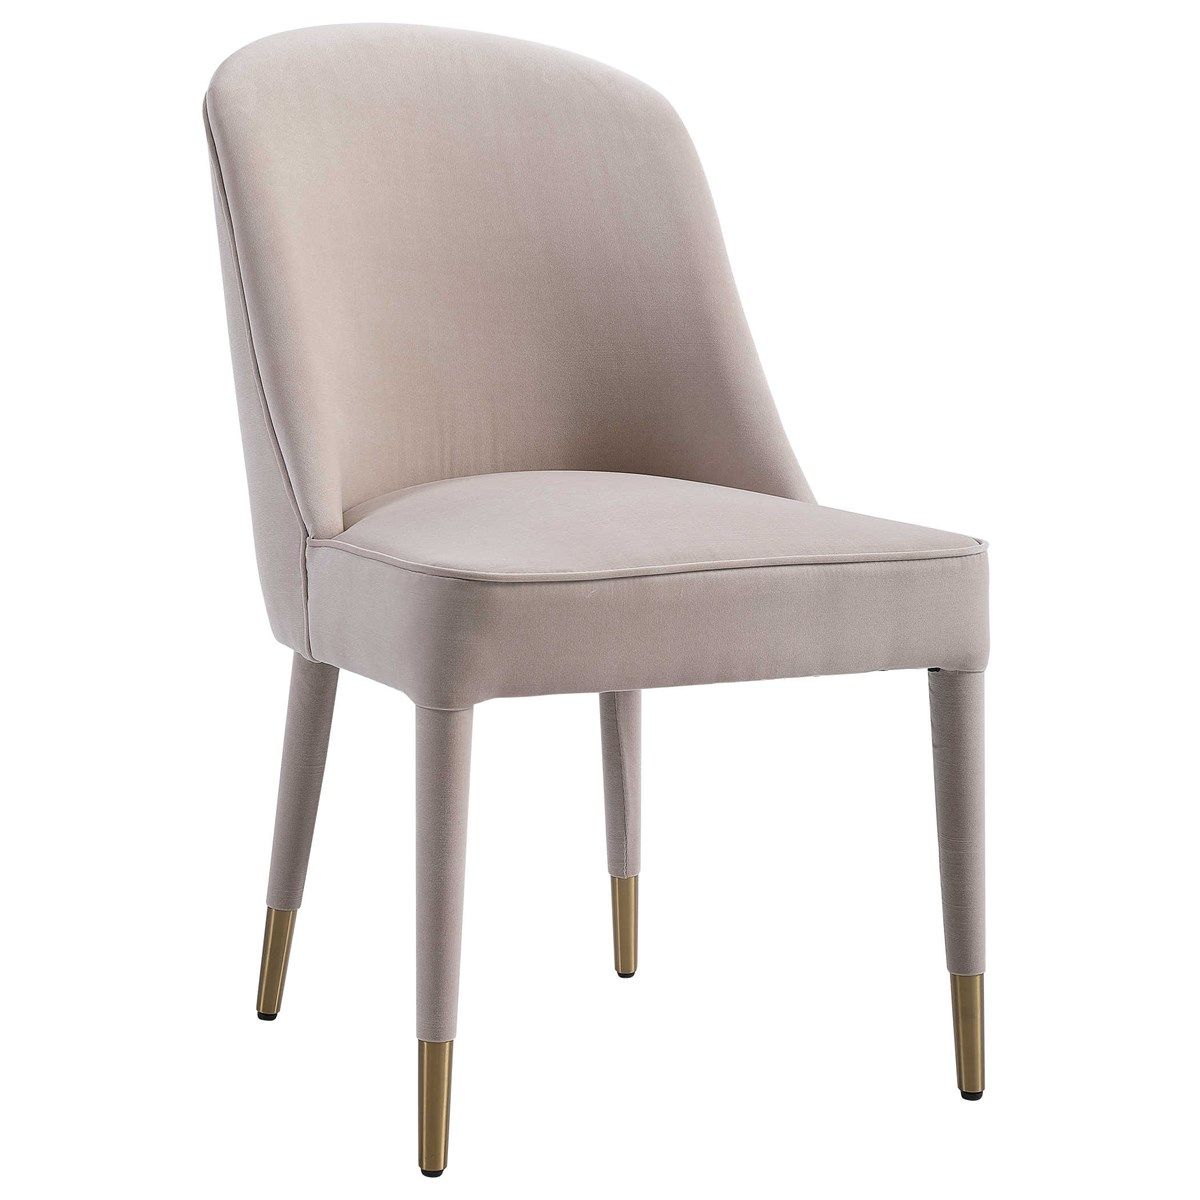 Brie - Armless Chair (Set of 2) - Champagne